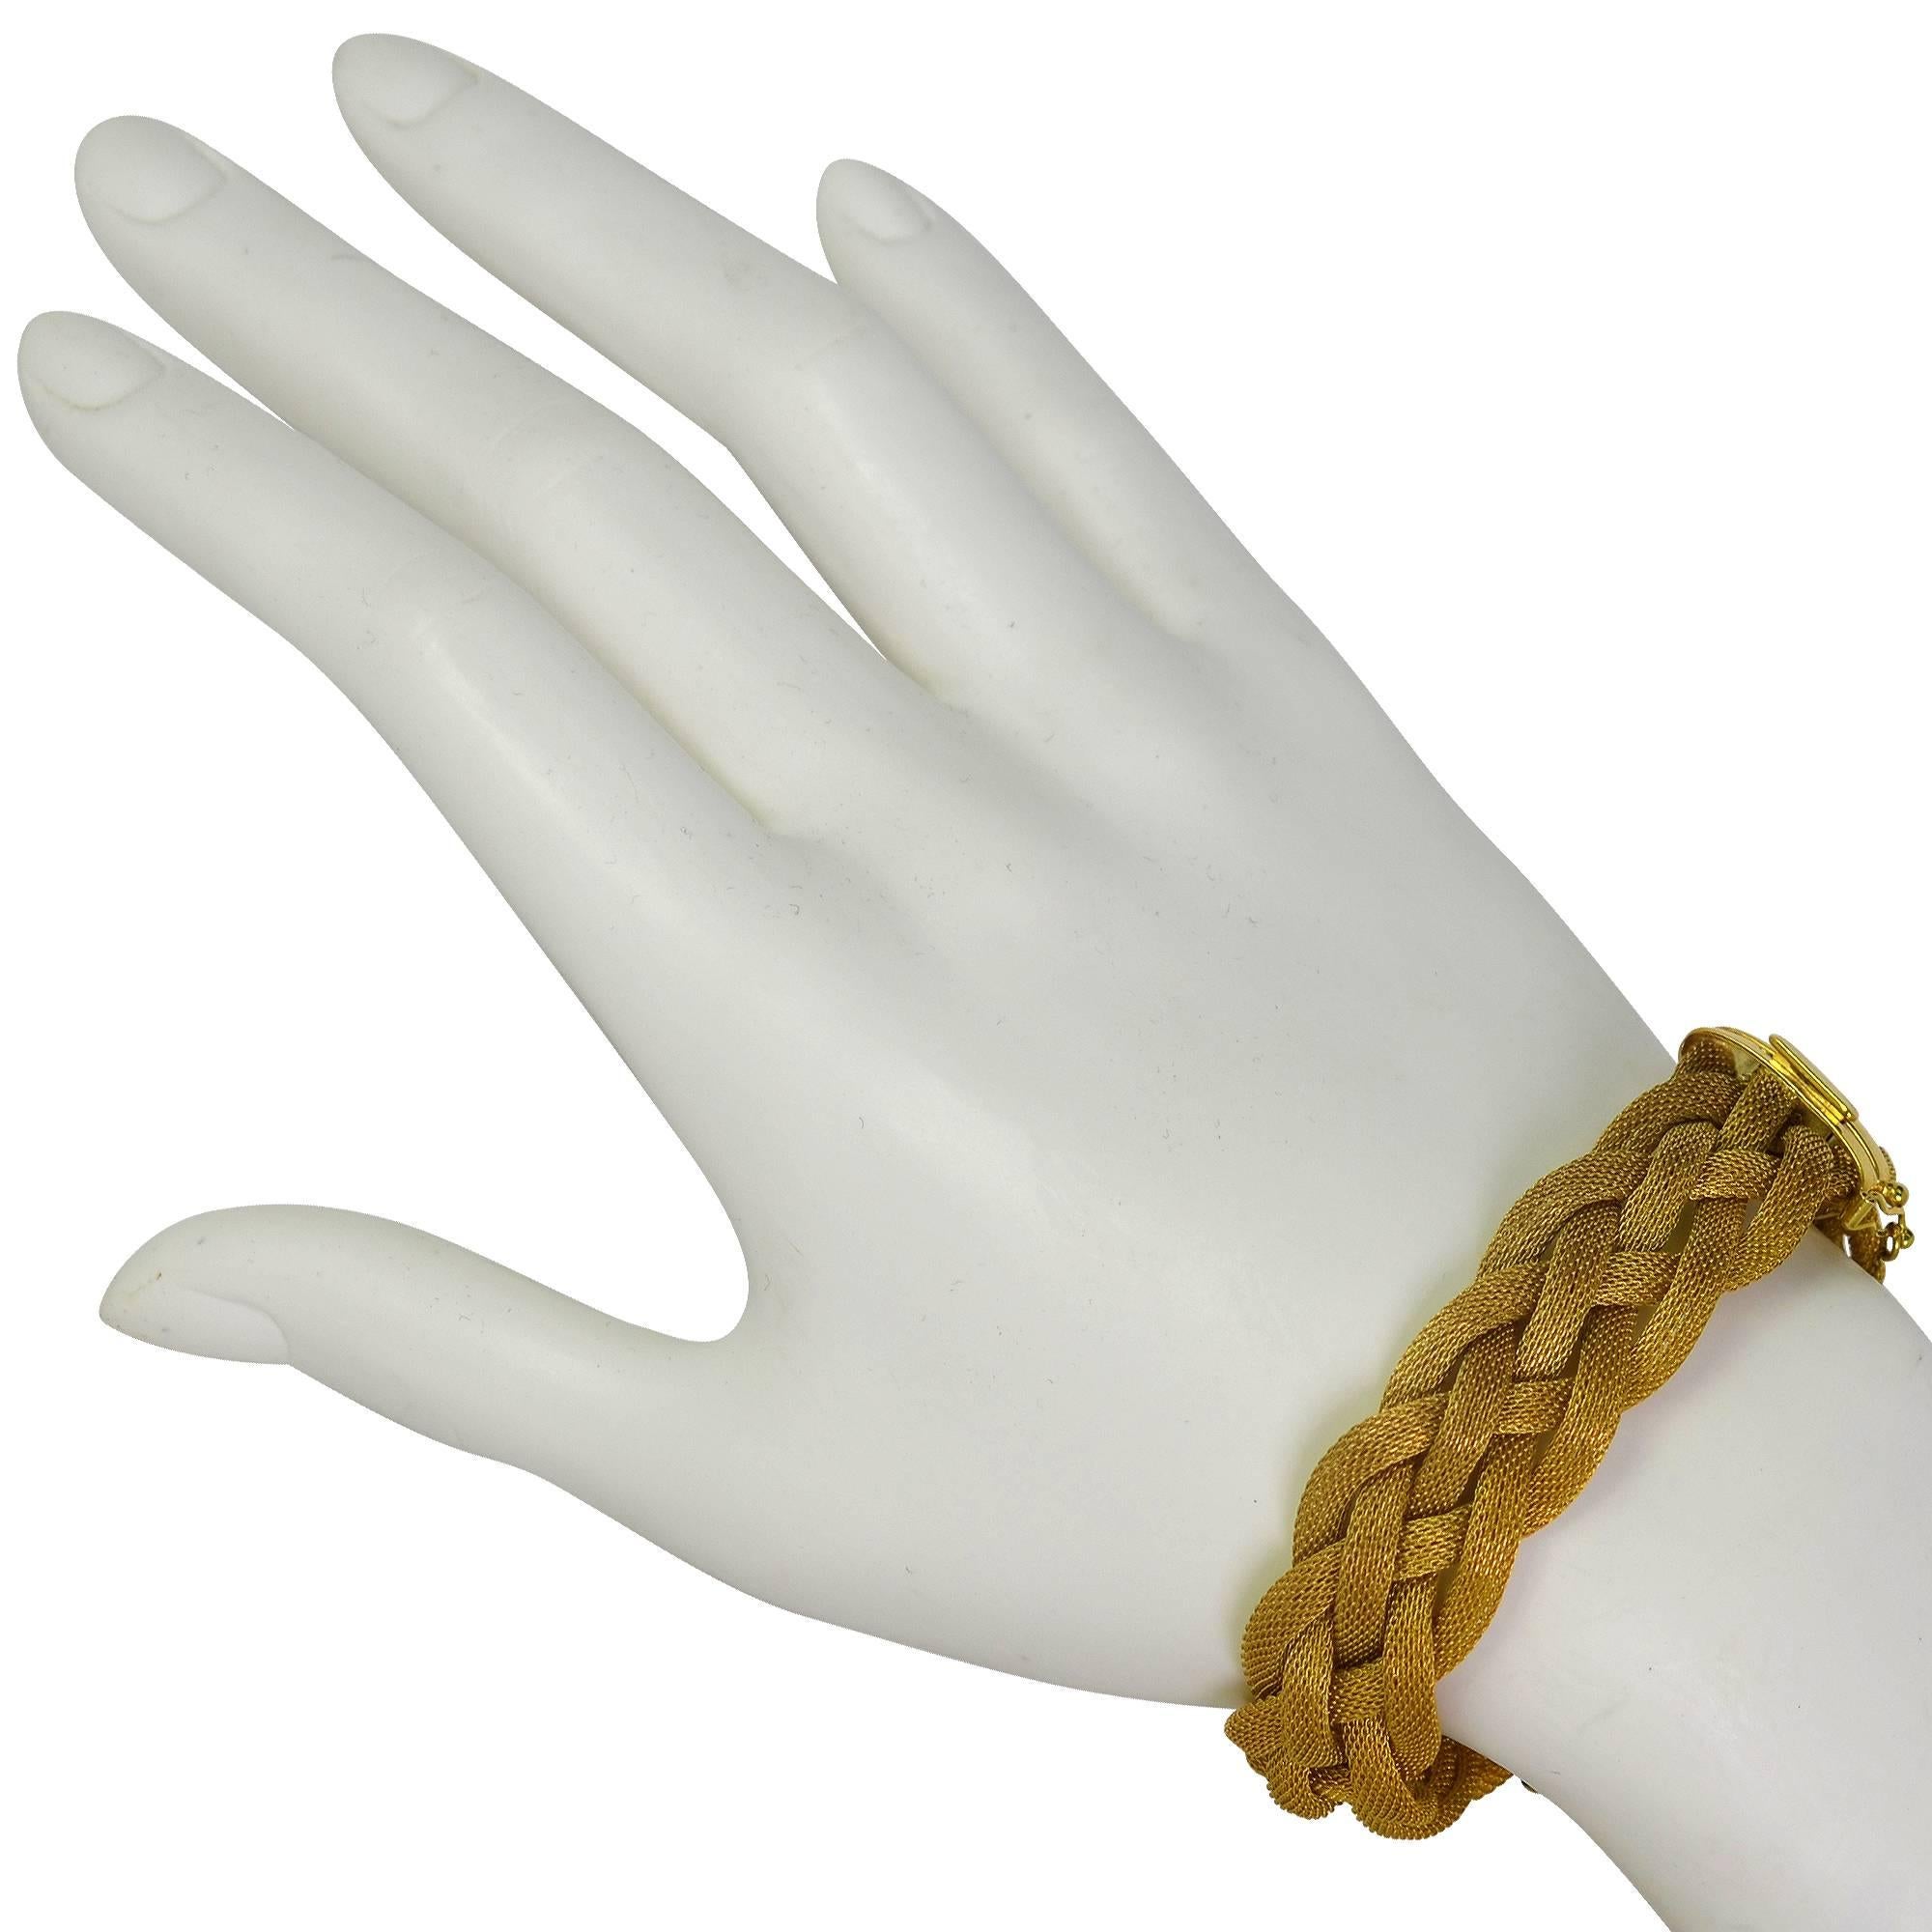 Stunning Italian 14k yellow gold Unoaerre bracelet featuring 14k yellow gold mesh braided to form a Silky smooth bracelet.

This bracelet measures 7.25 inches in length by .7 inches wide.
It is stamped and/or tested as 14k gold.
The metal weight is